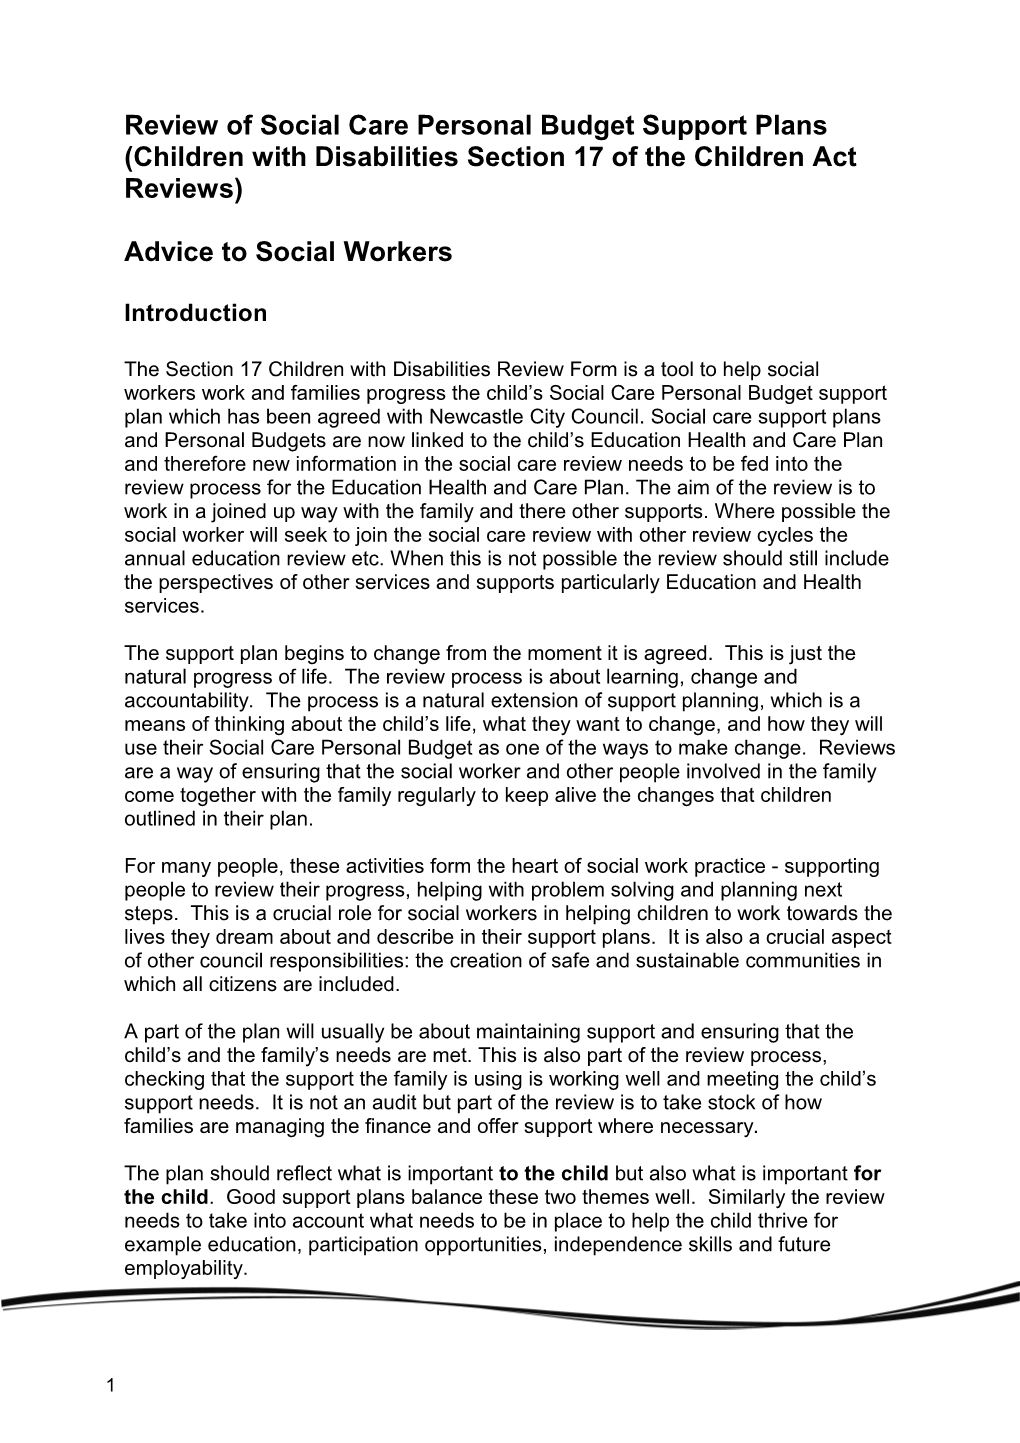 Review of Individual Budgets Advice to Social Workers